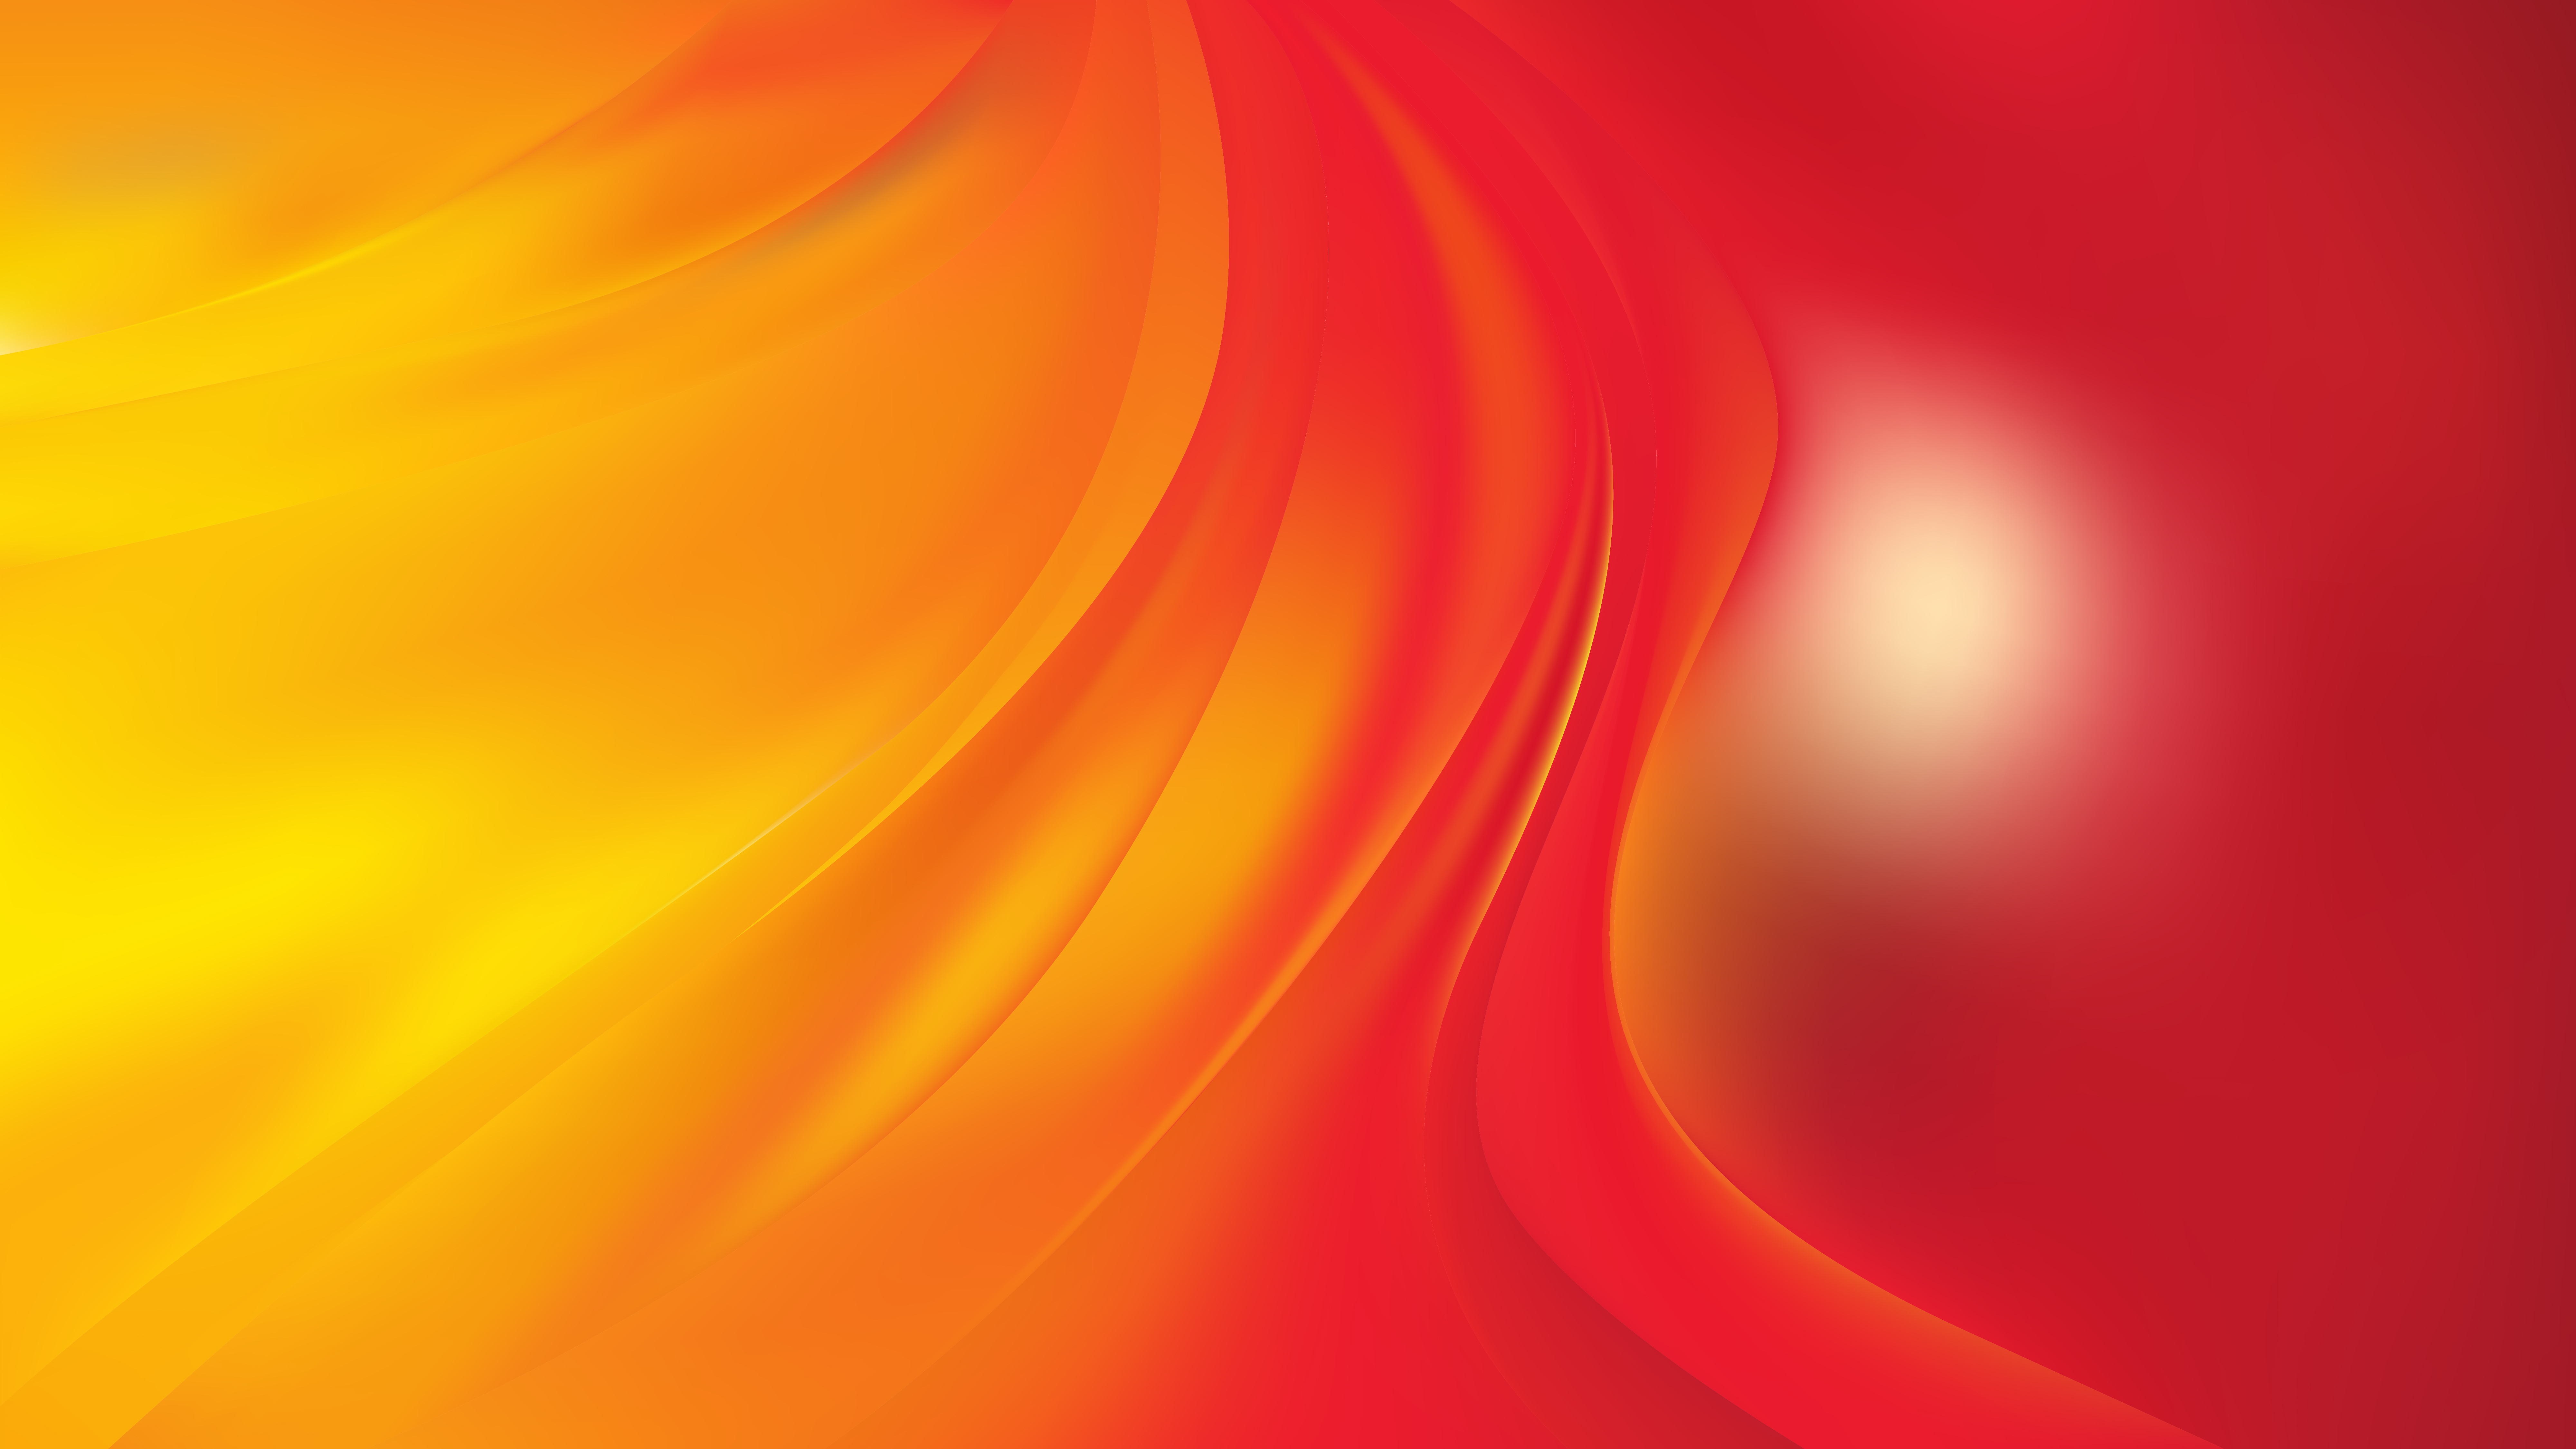 Free Glowing Abstract Red and Yellow Wave Background Vector Art